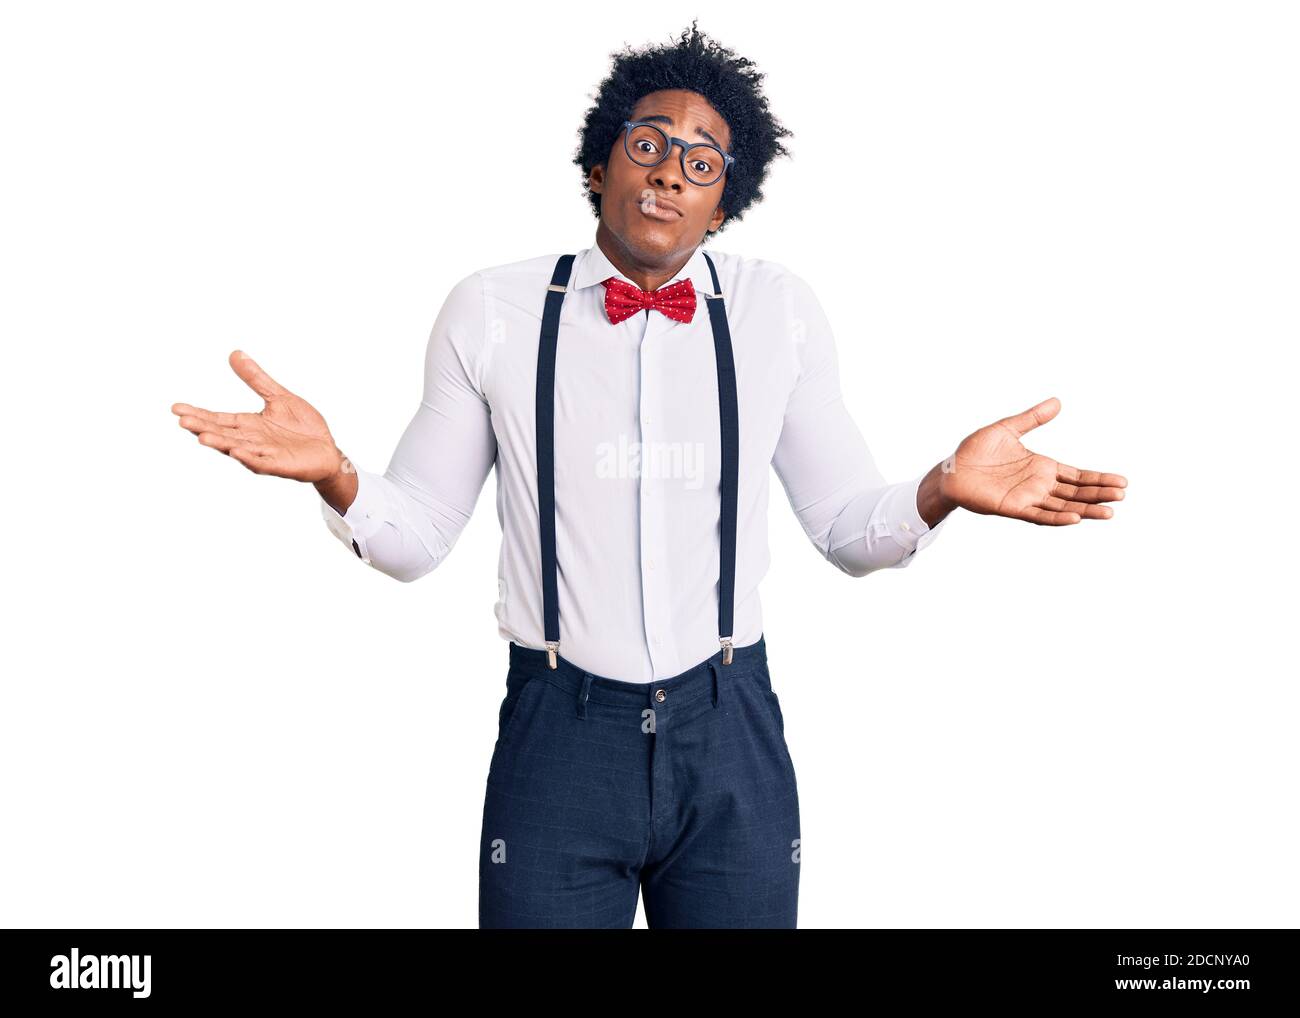 Handsome african american man with afro hair wearing hipster elegant look clueless and confused expression with arms and hands raised. doubt concept. Stock Photo